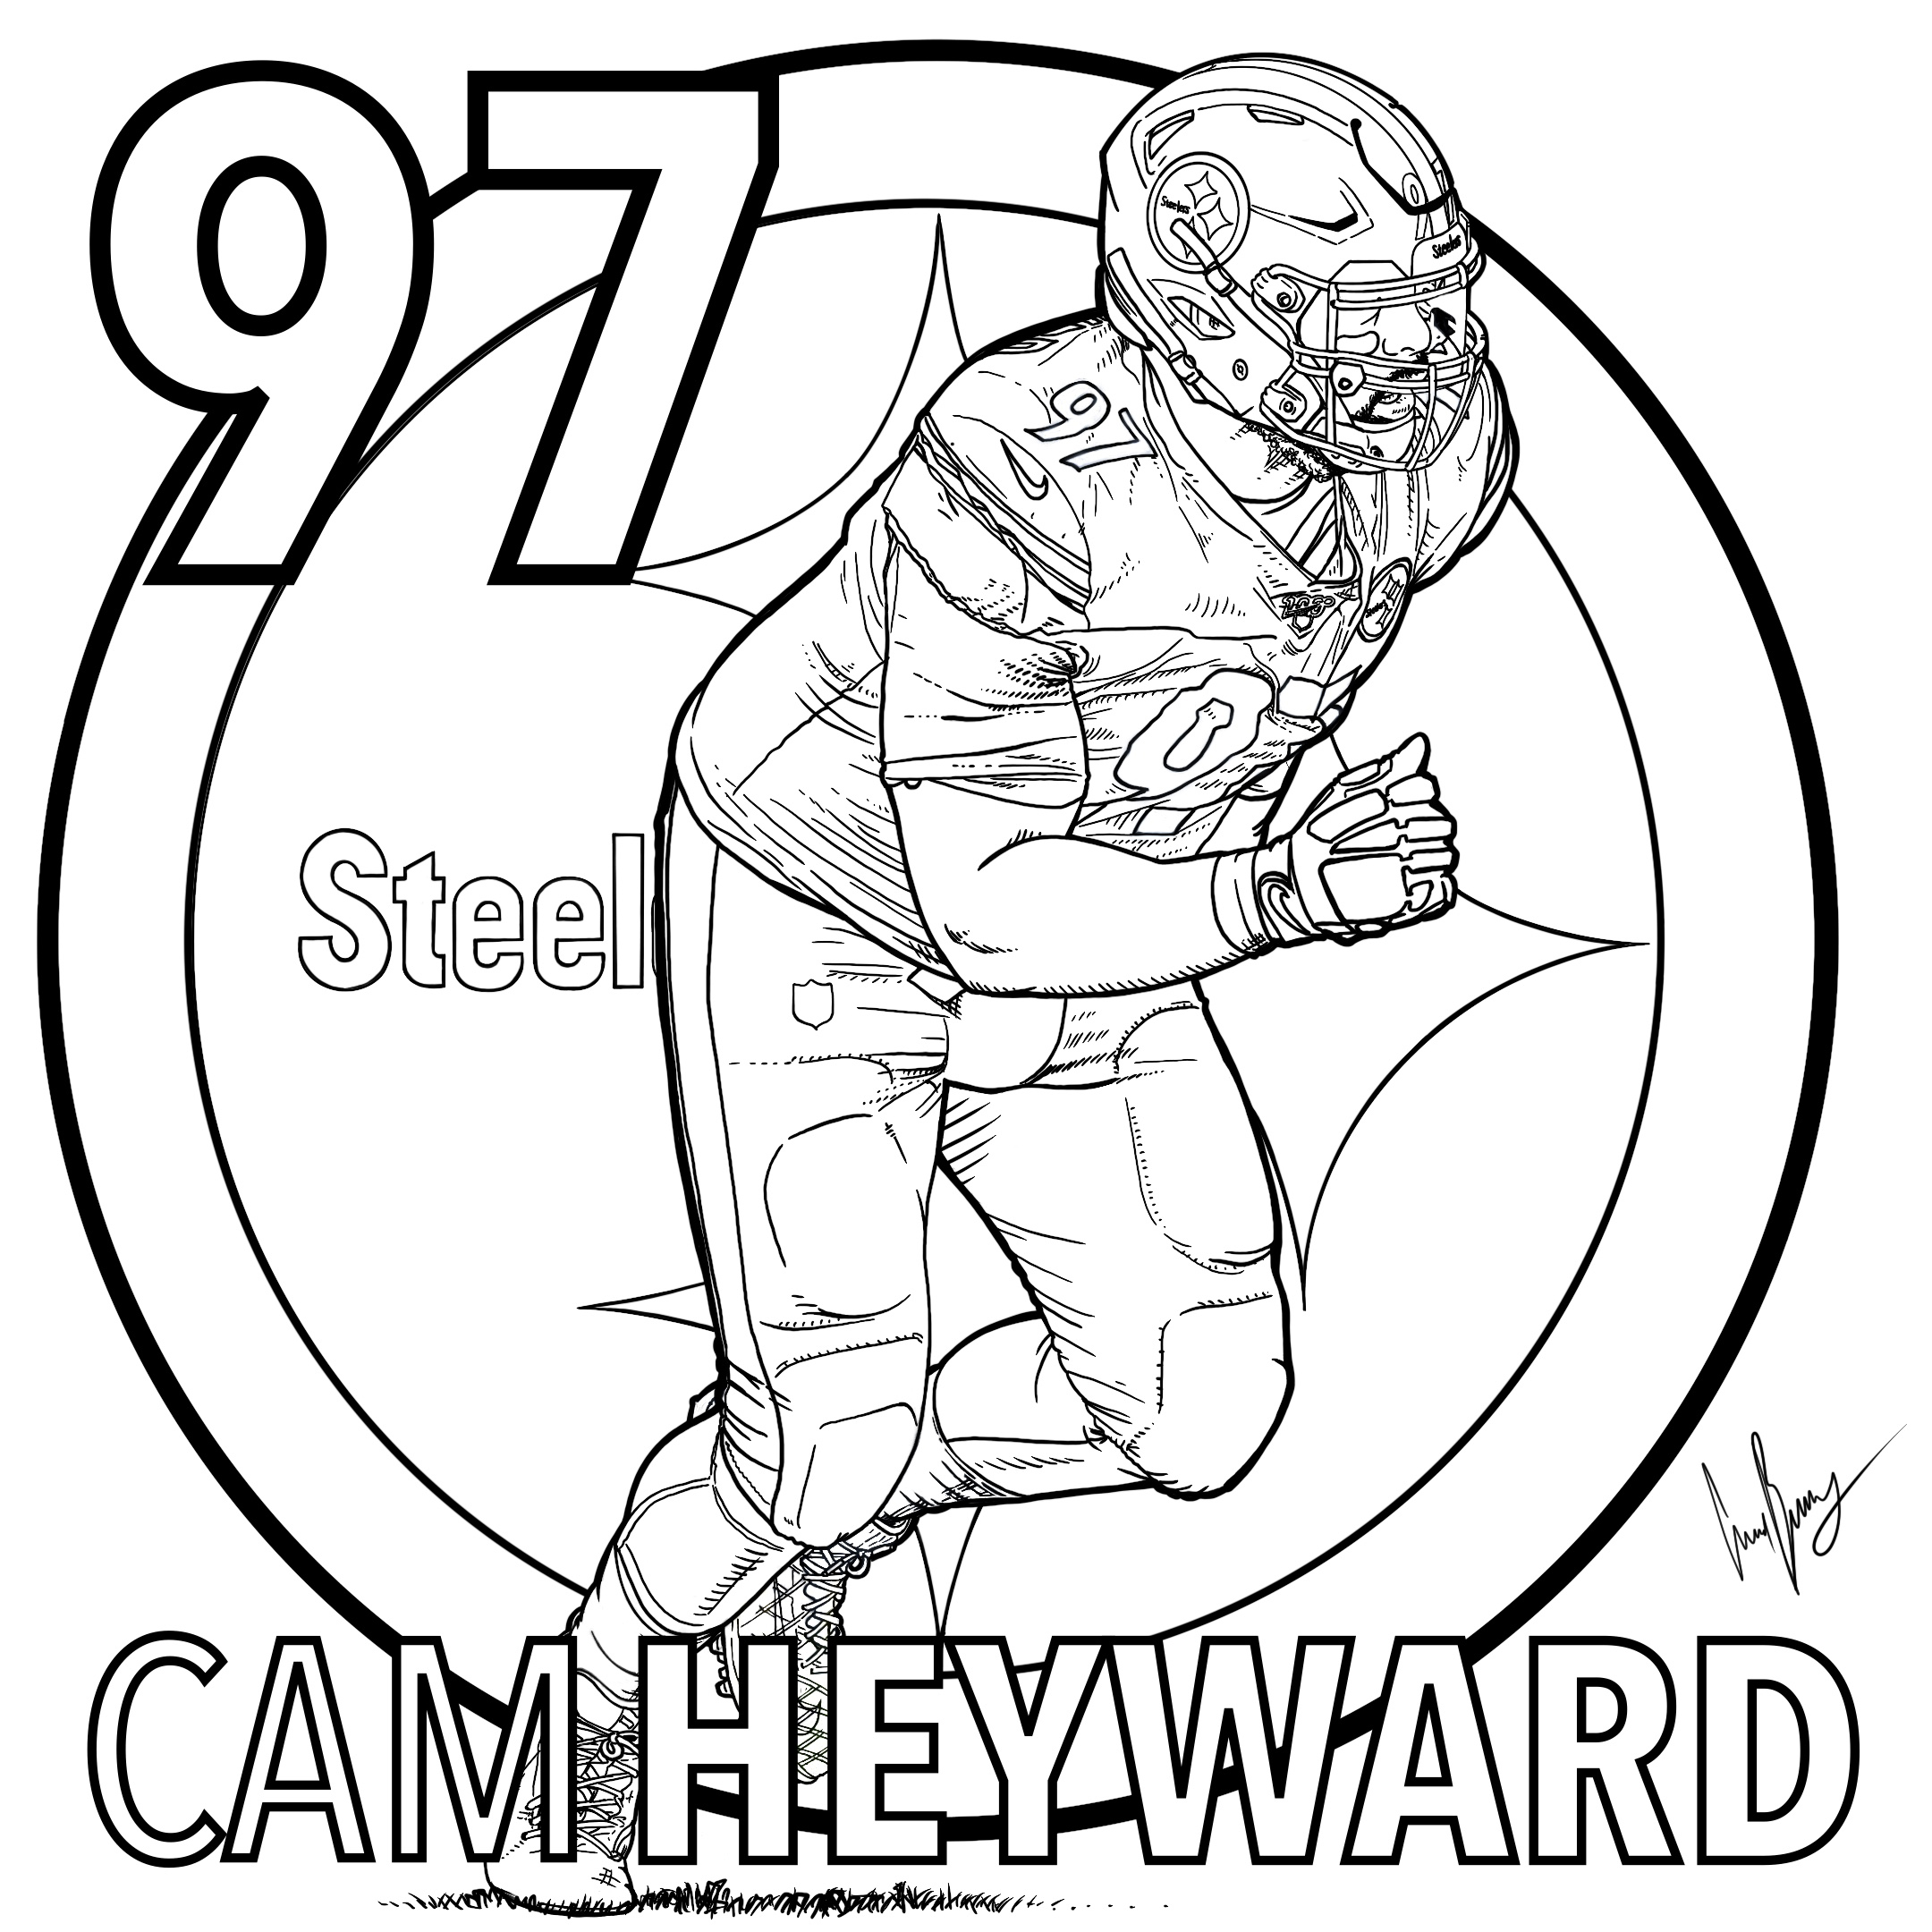 Chicago Bears Logo Coloring Pages - NFL Coloring Pages - Coloring Pages For  Kids And Adults